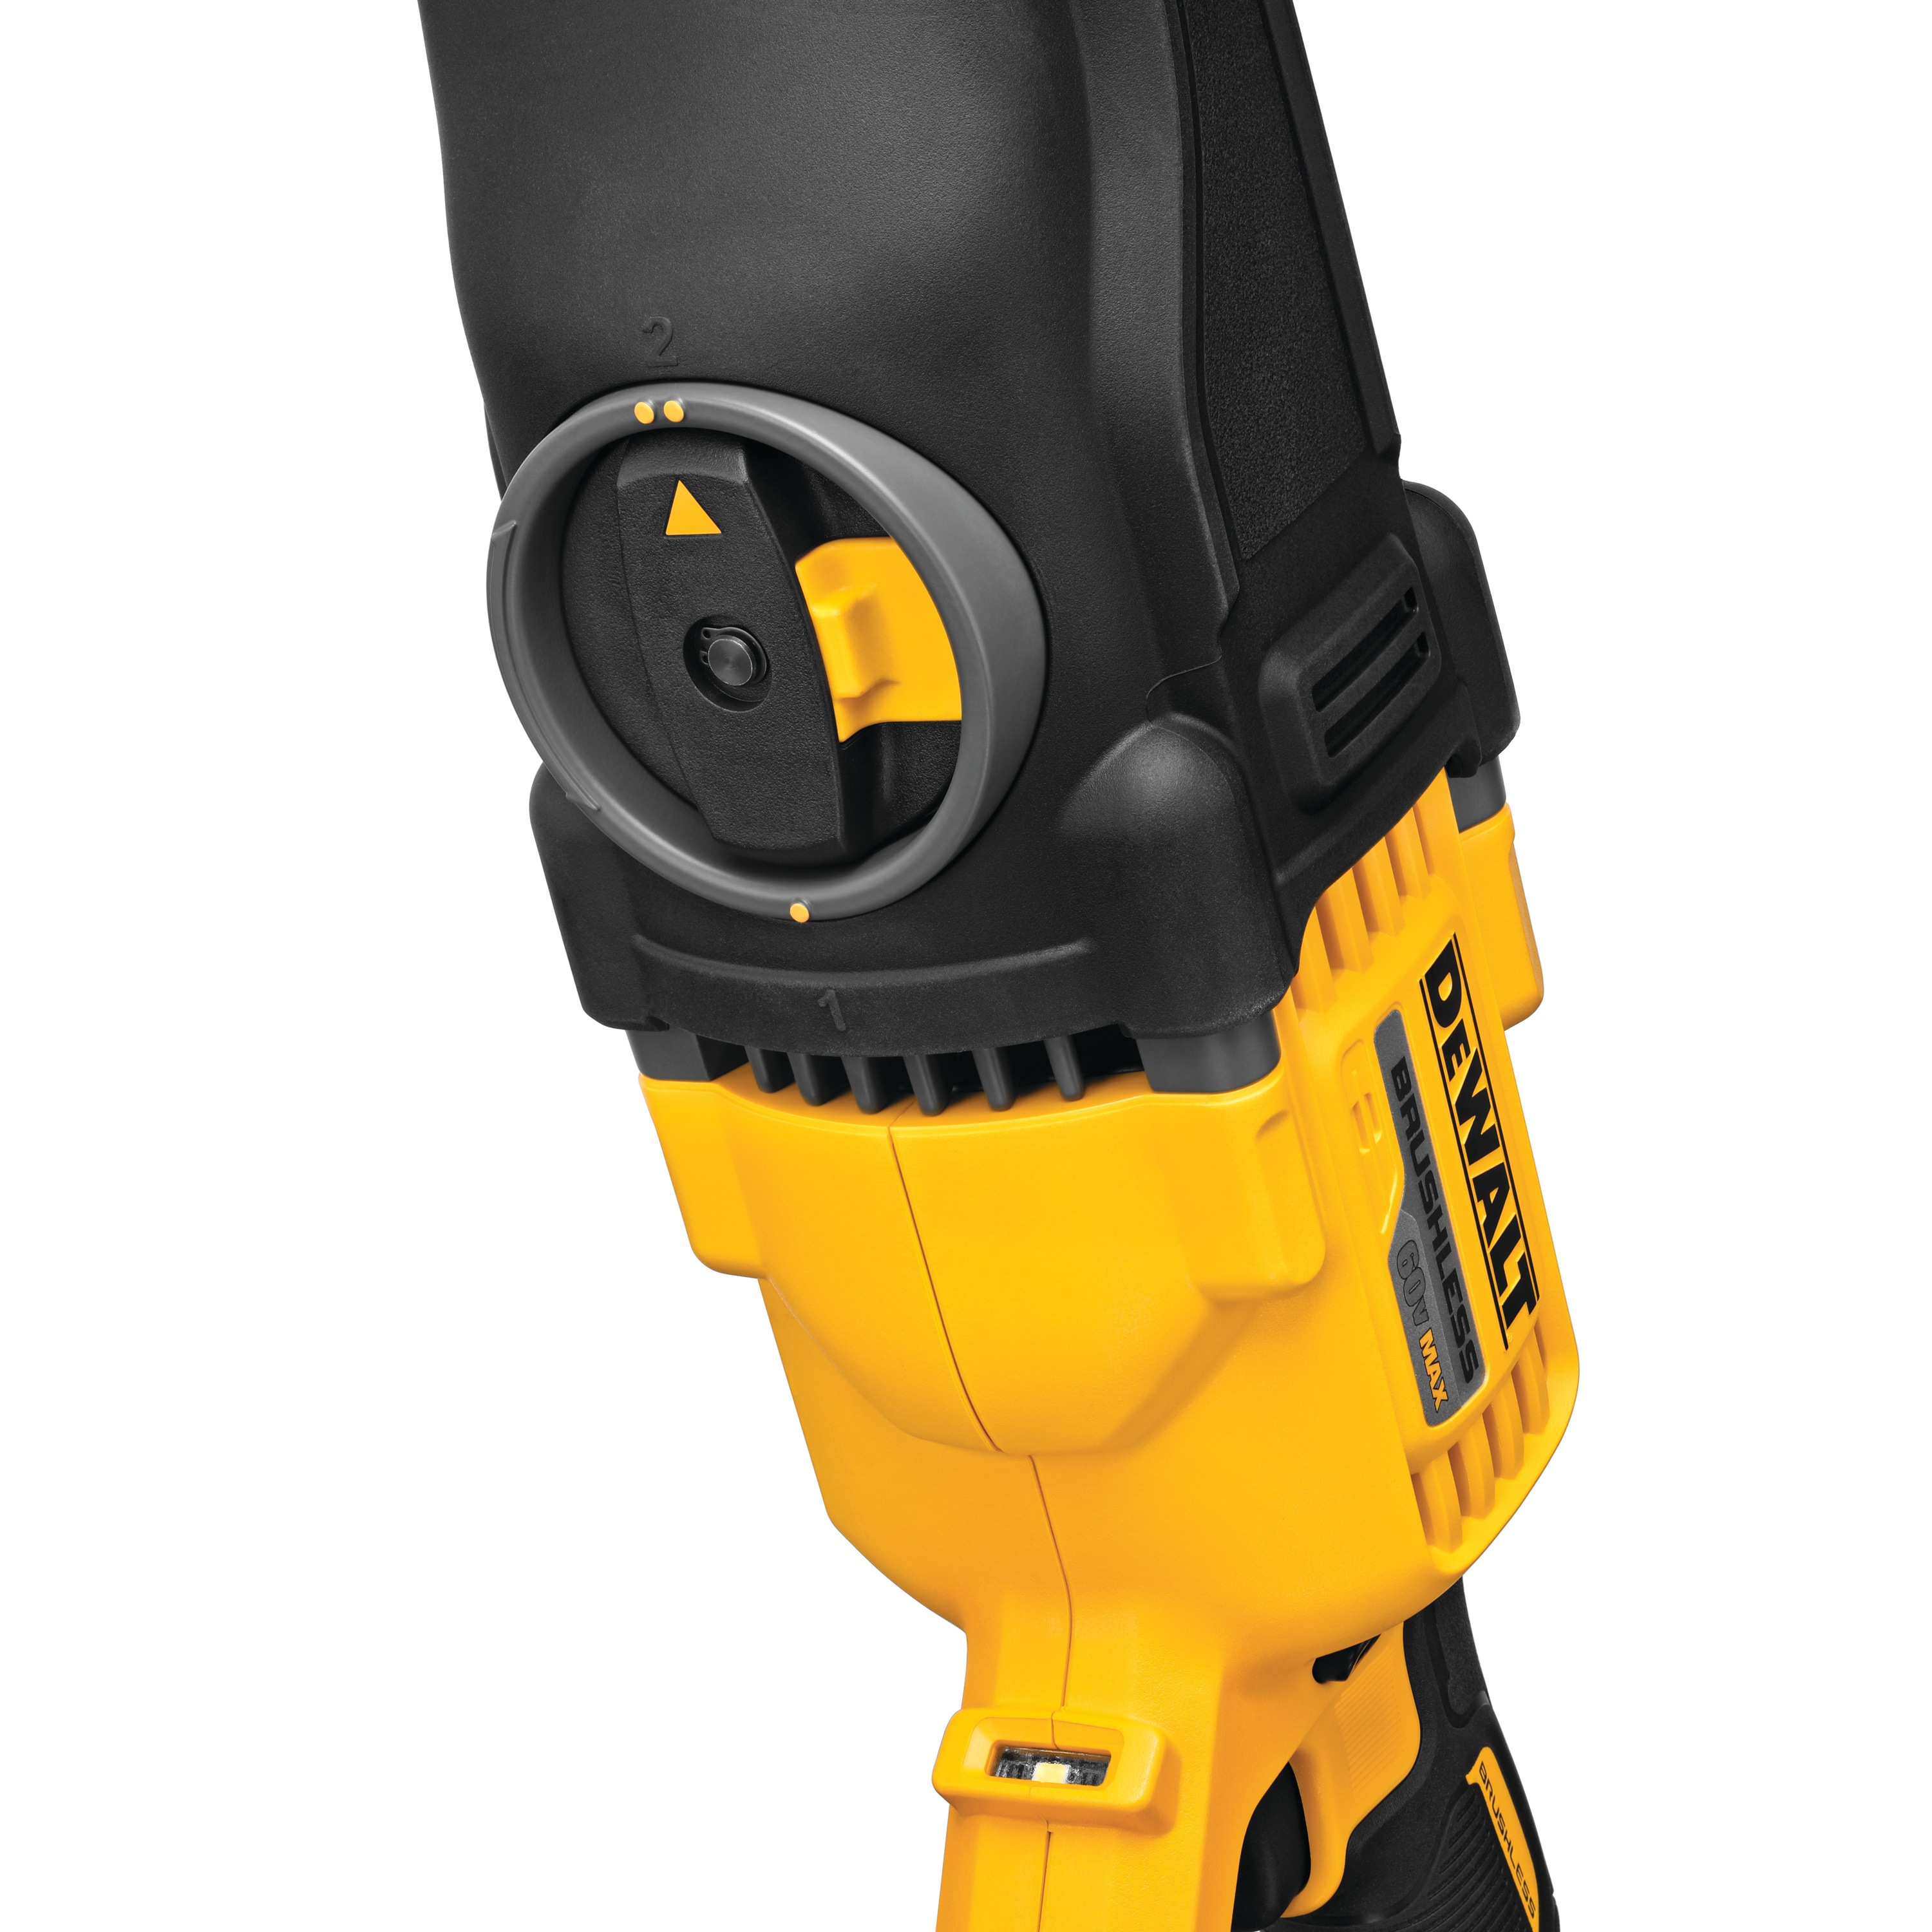 Quick-shift speed selector feature of a brushless cordless quick-change stud and joist drill.